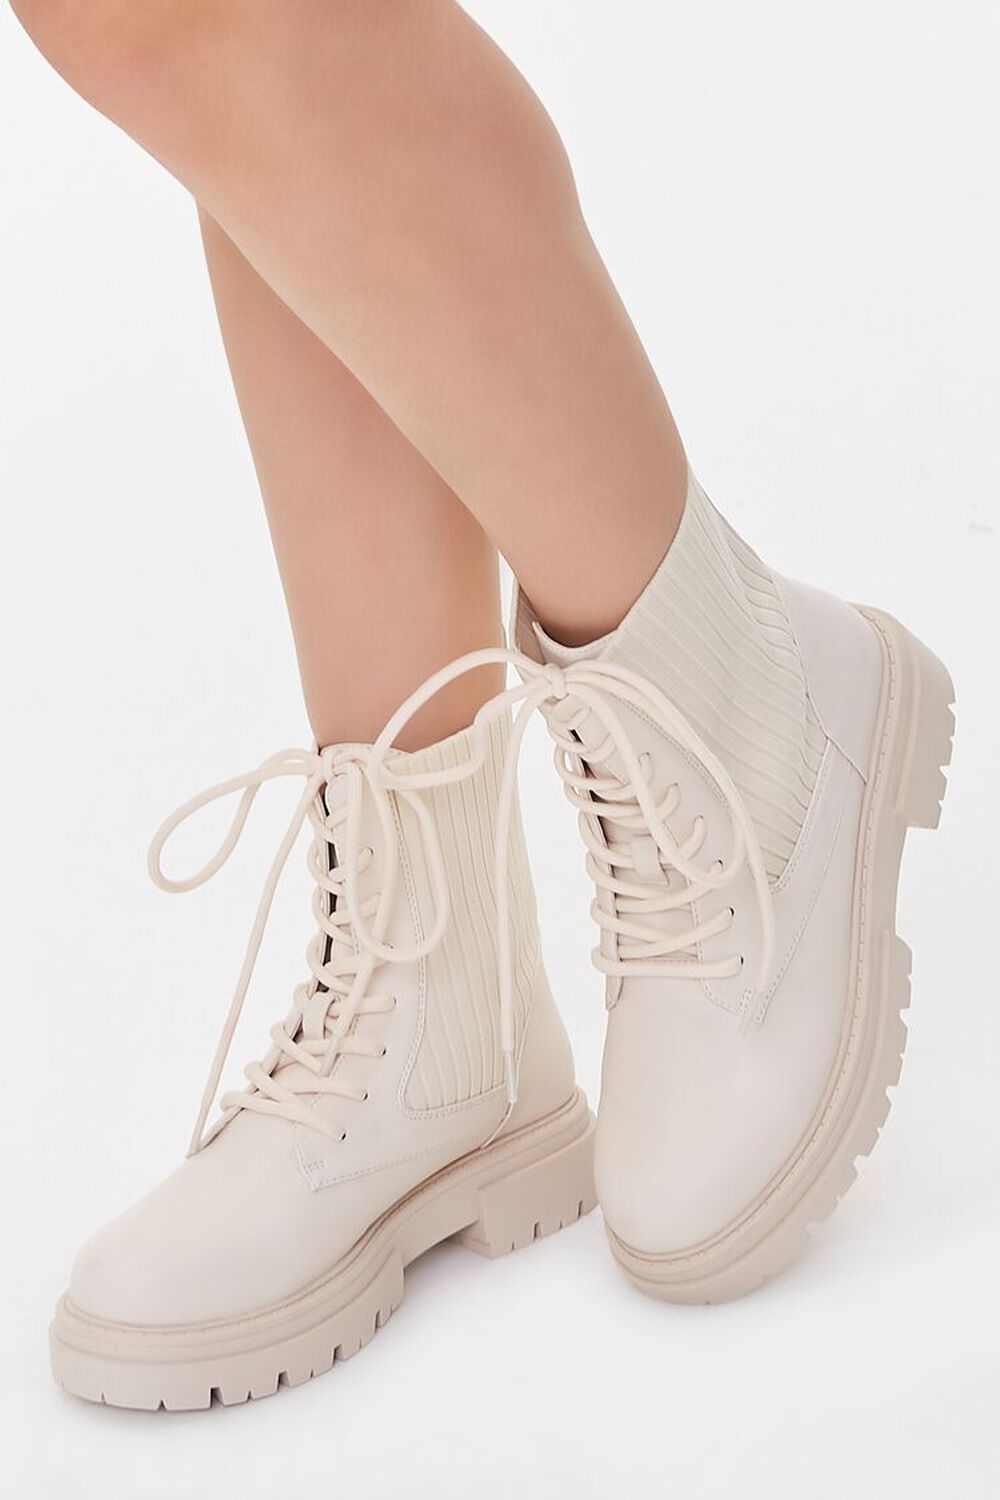 CREAM Faux Leather Ribbed Booties, image 1